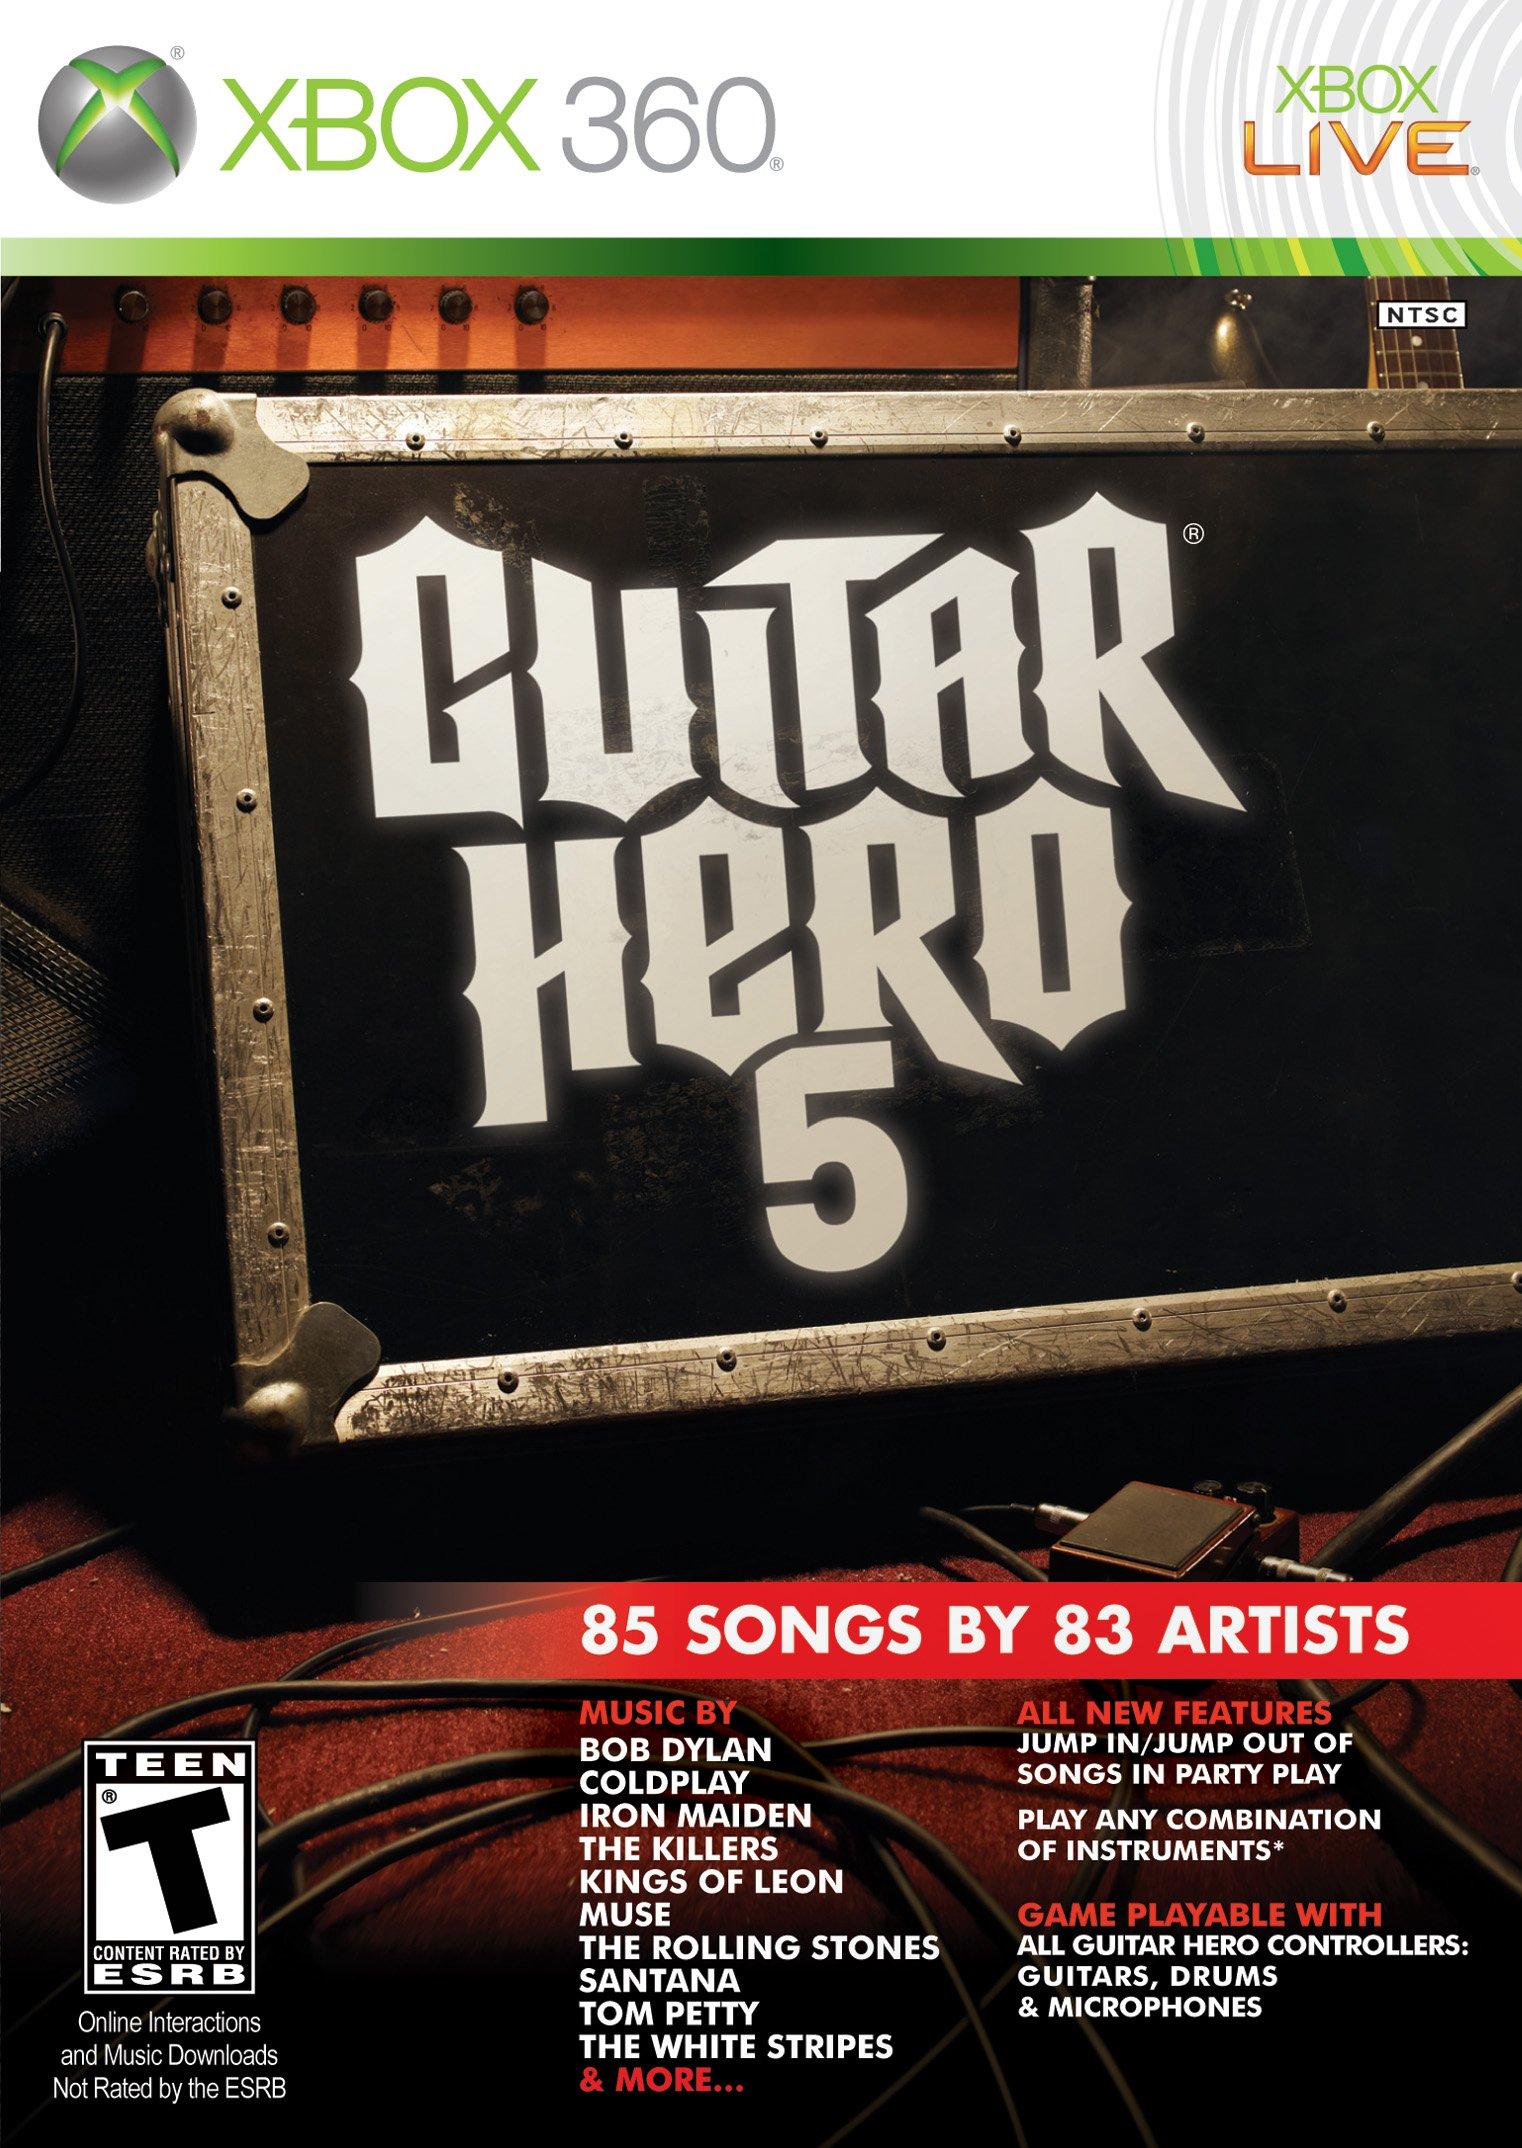 Guitar Hero 5 (Game Only) - Xbox 360